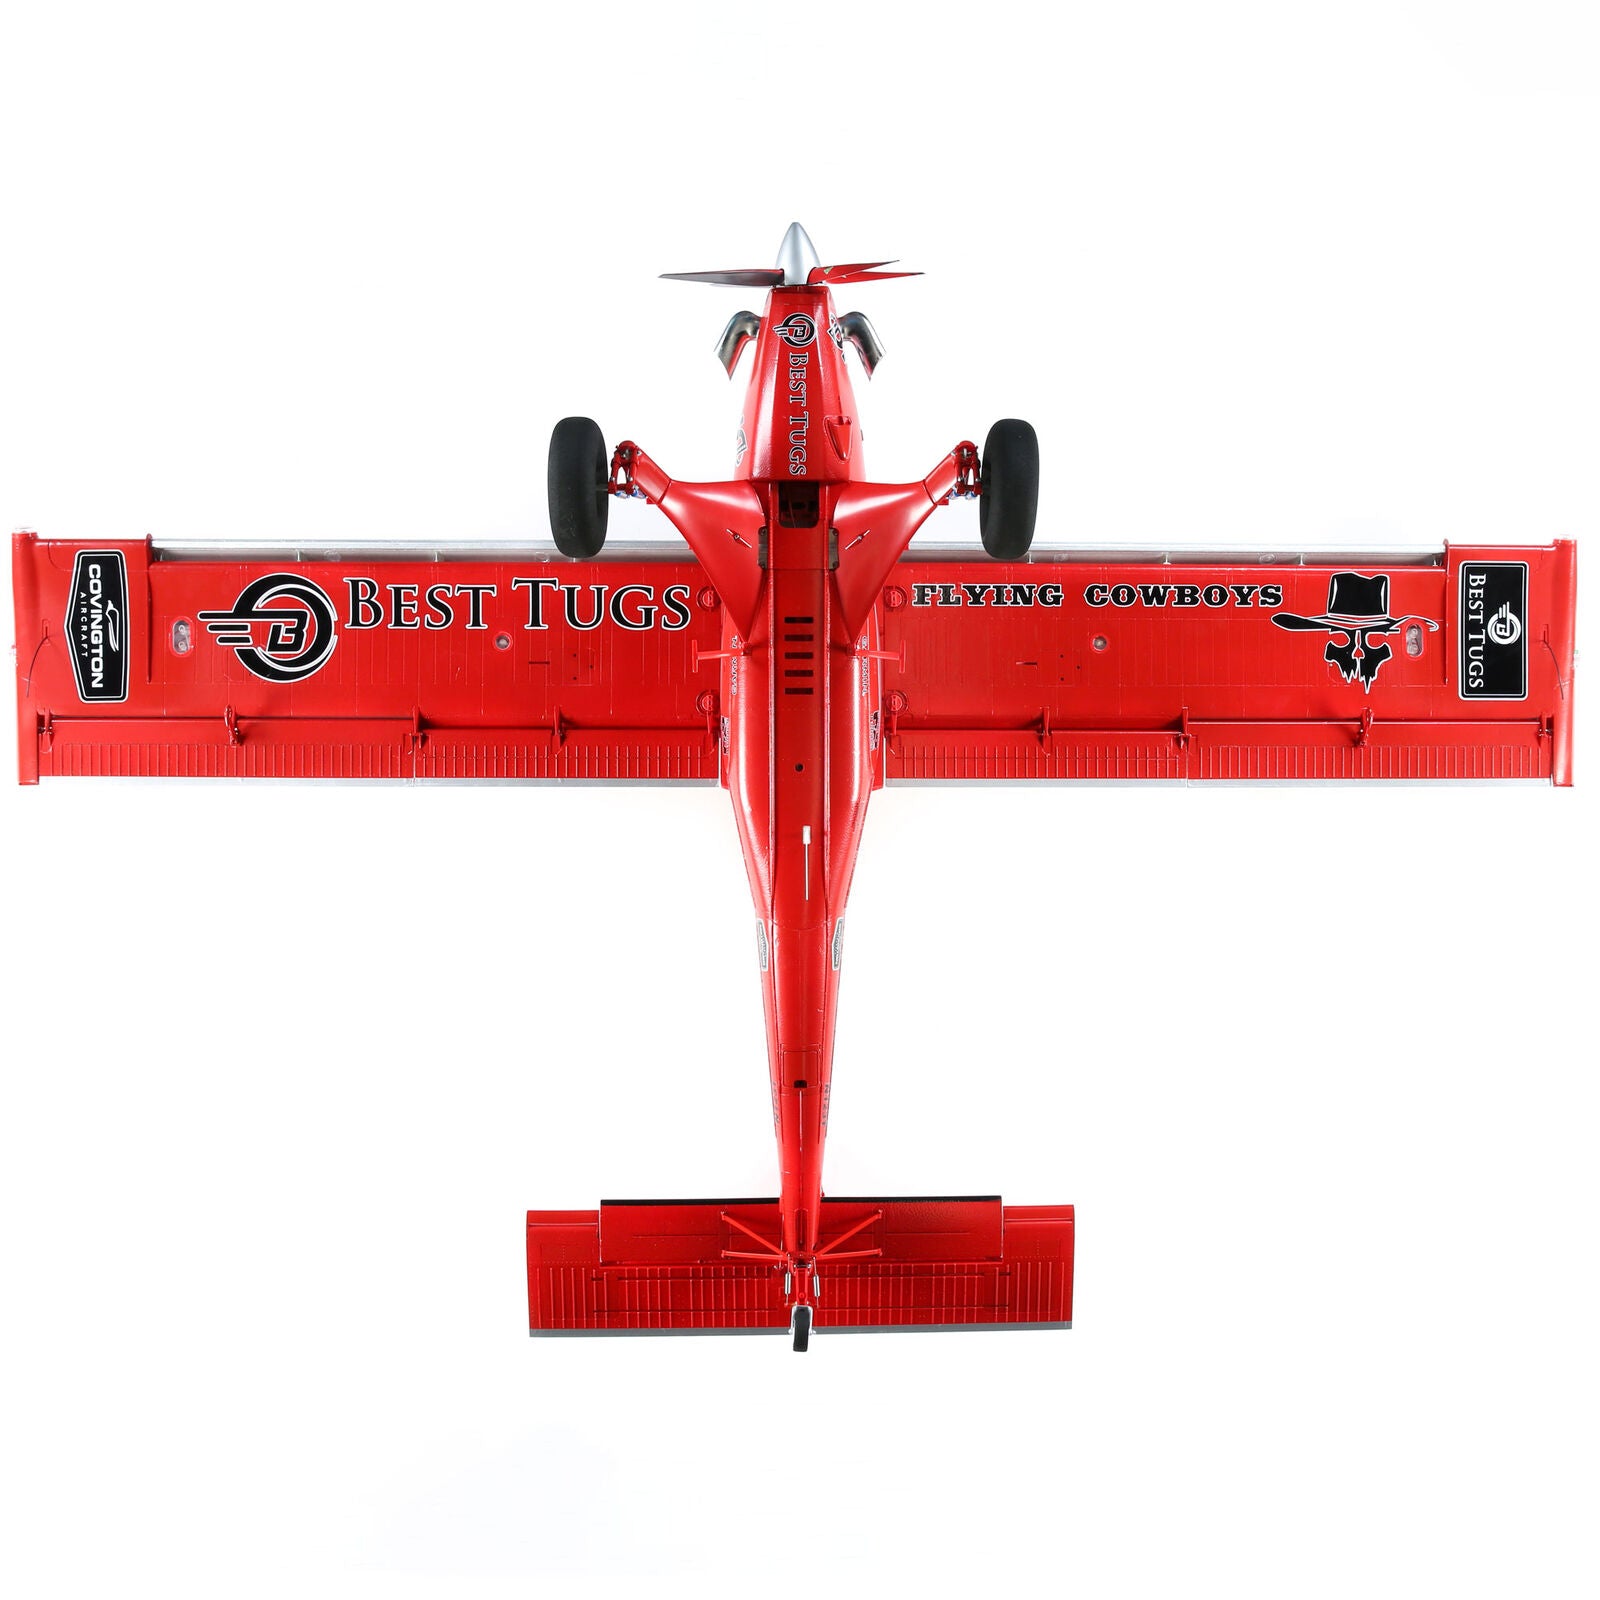 E-flite DRACO 2.0m Smart BNF Basic with AS3X and SAFE Select - EFL12550